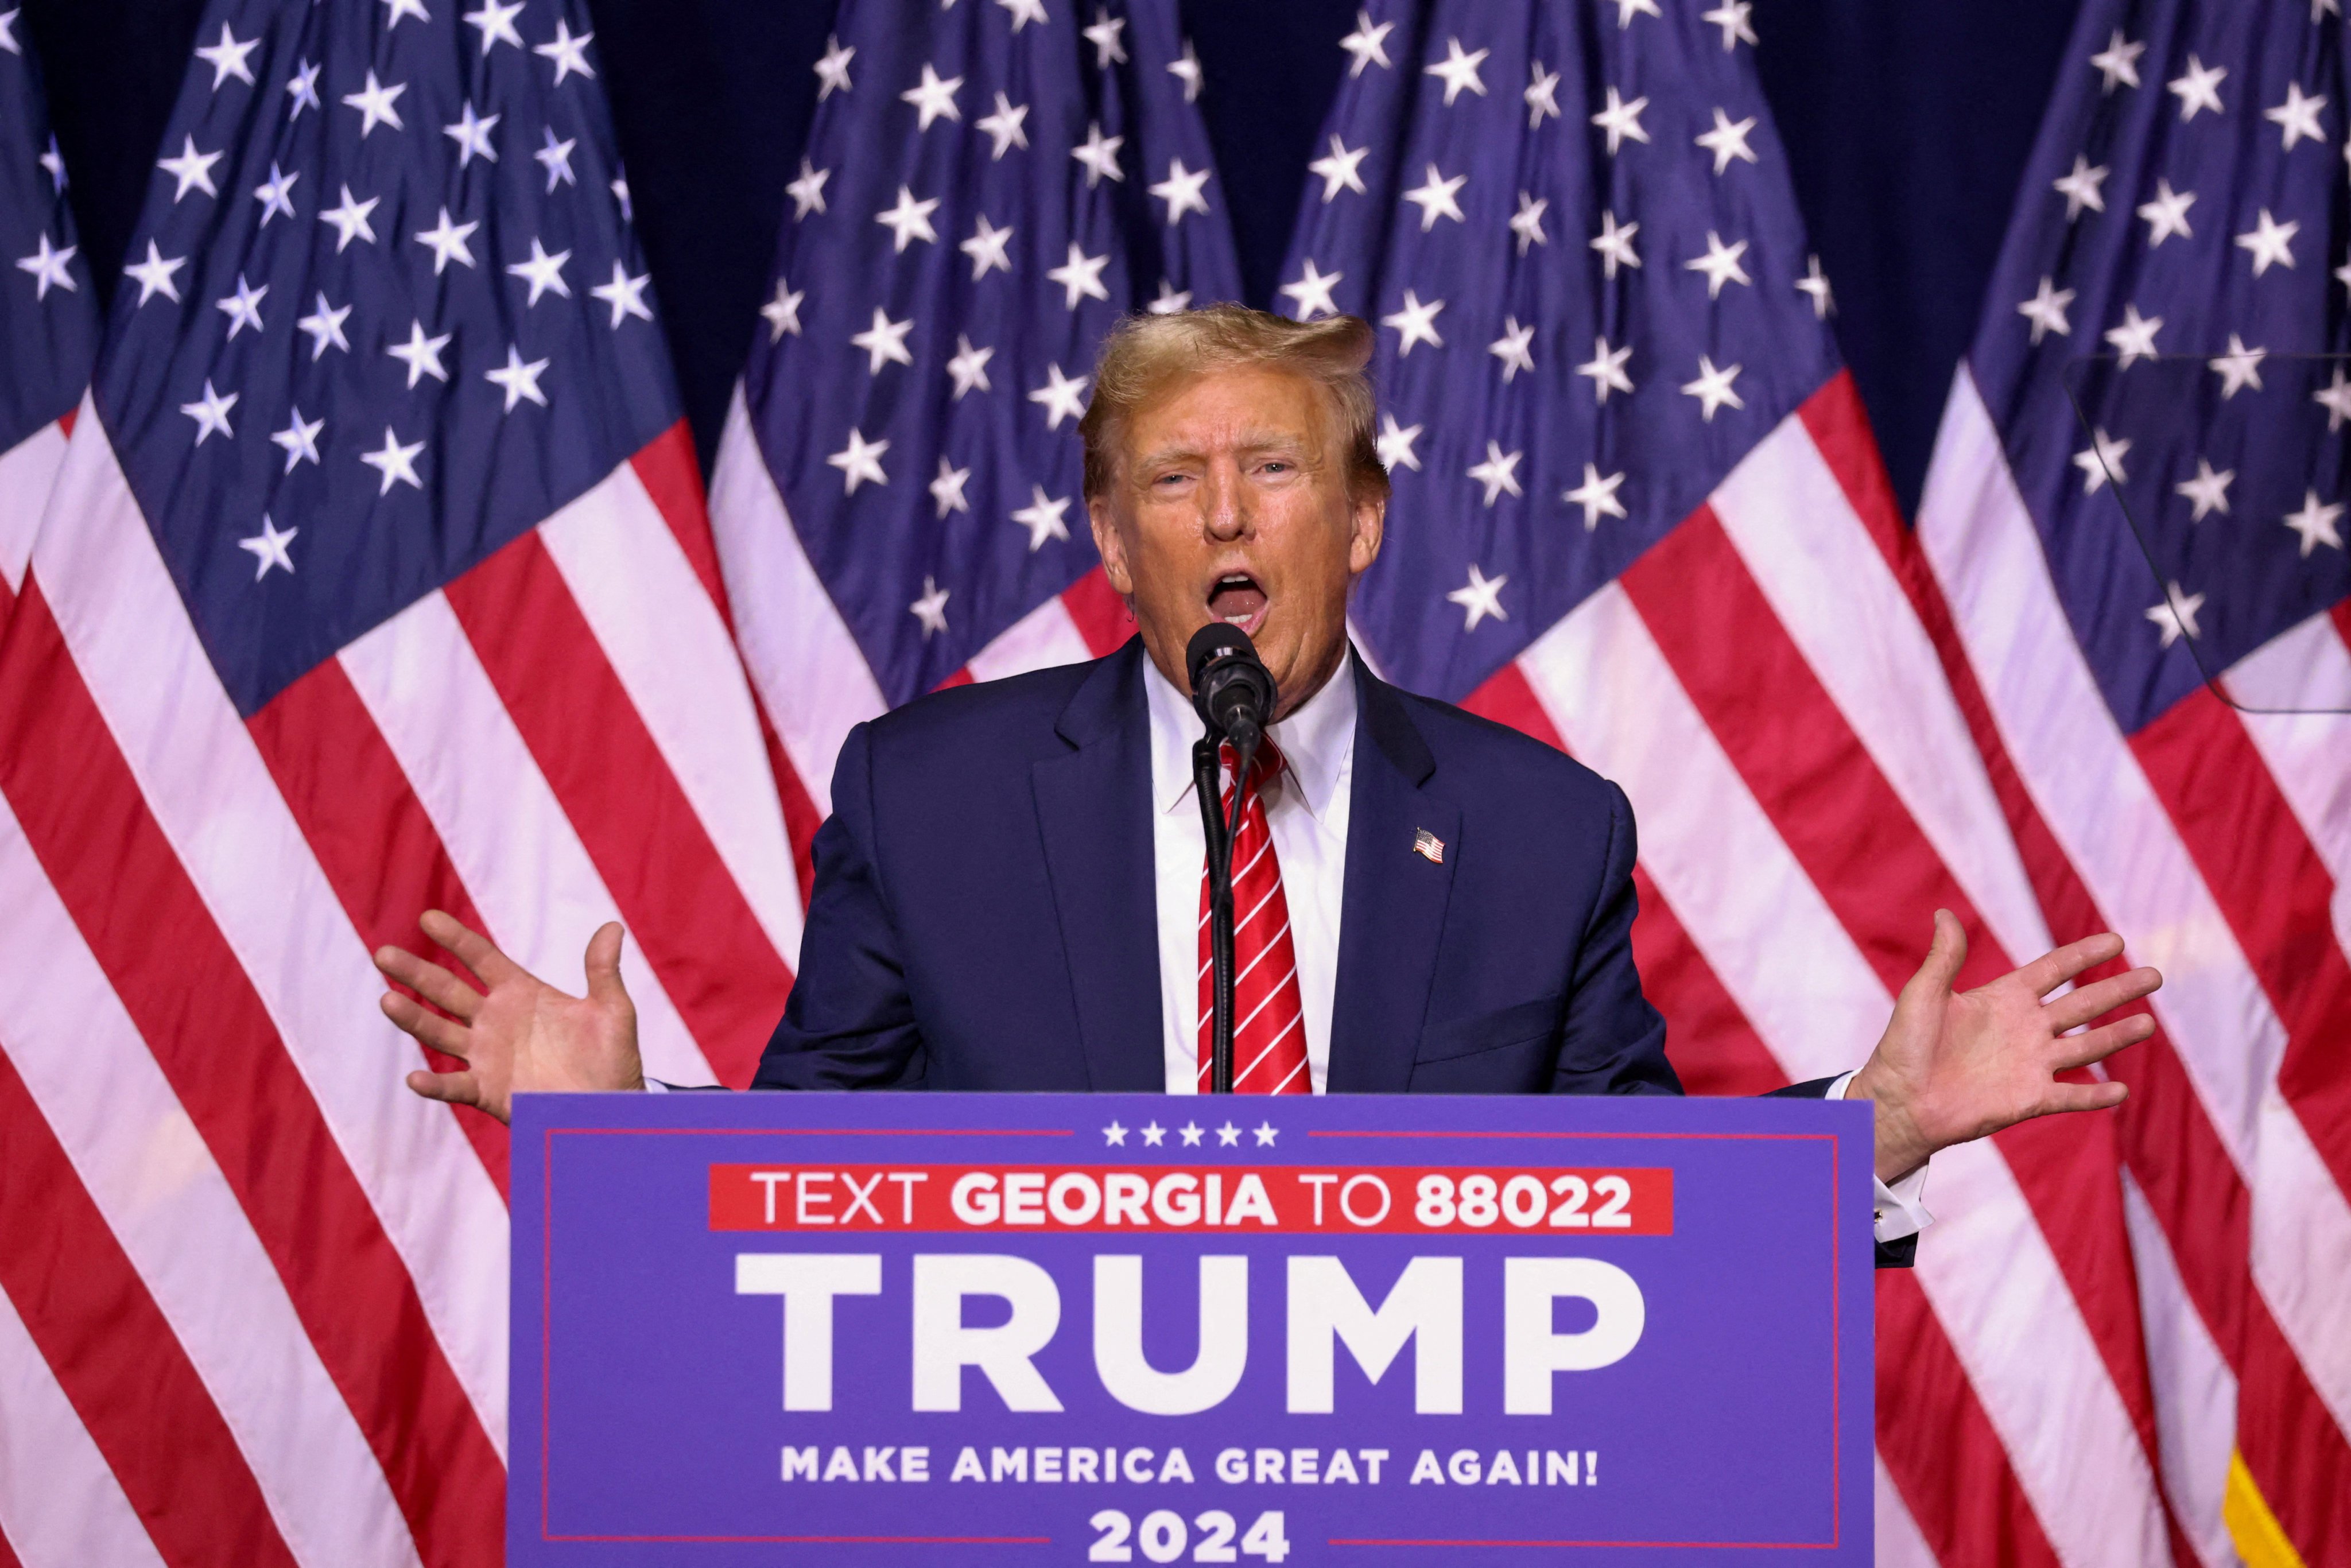 Former US president and presumptive 2024 Republican nominee Donald Trump speaks during a campaign rally in Rome, Georgia, on Saturday. Photo: Reuters